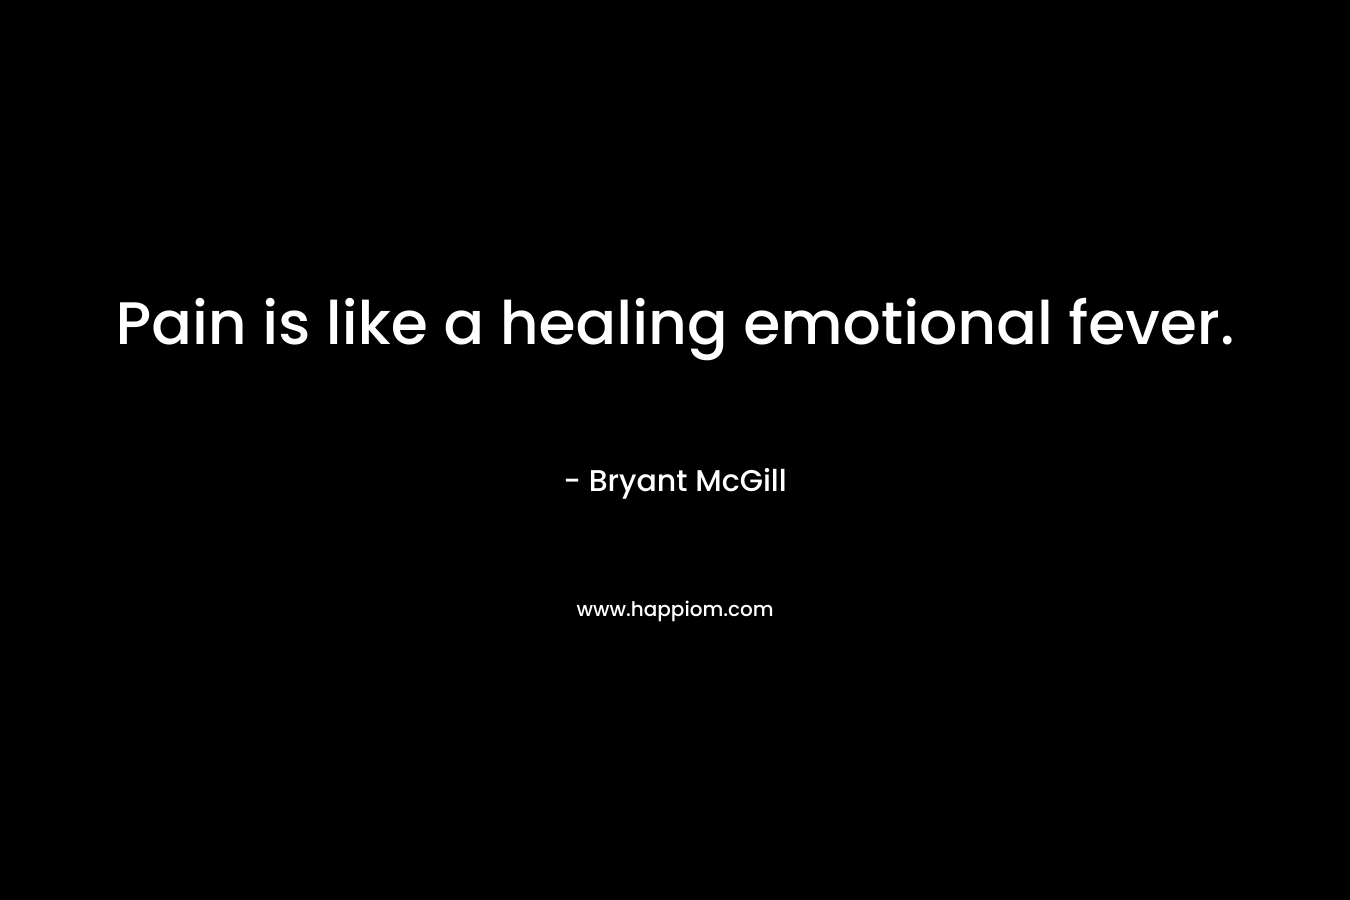 Pain is like a healing emotional fever.